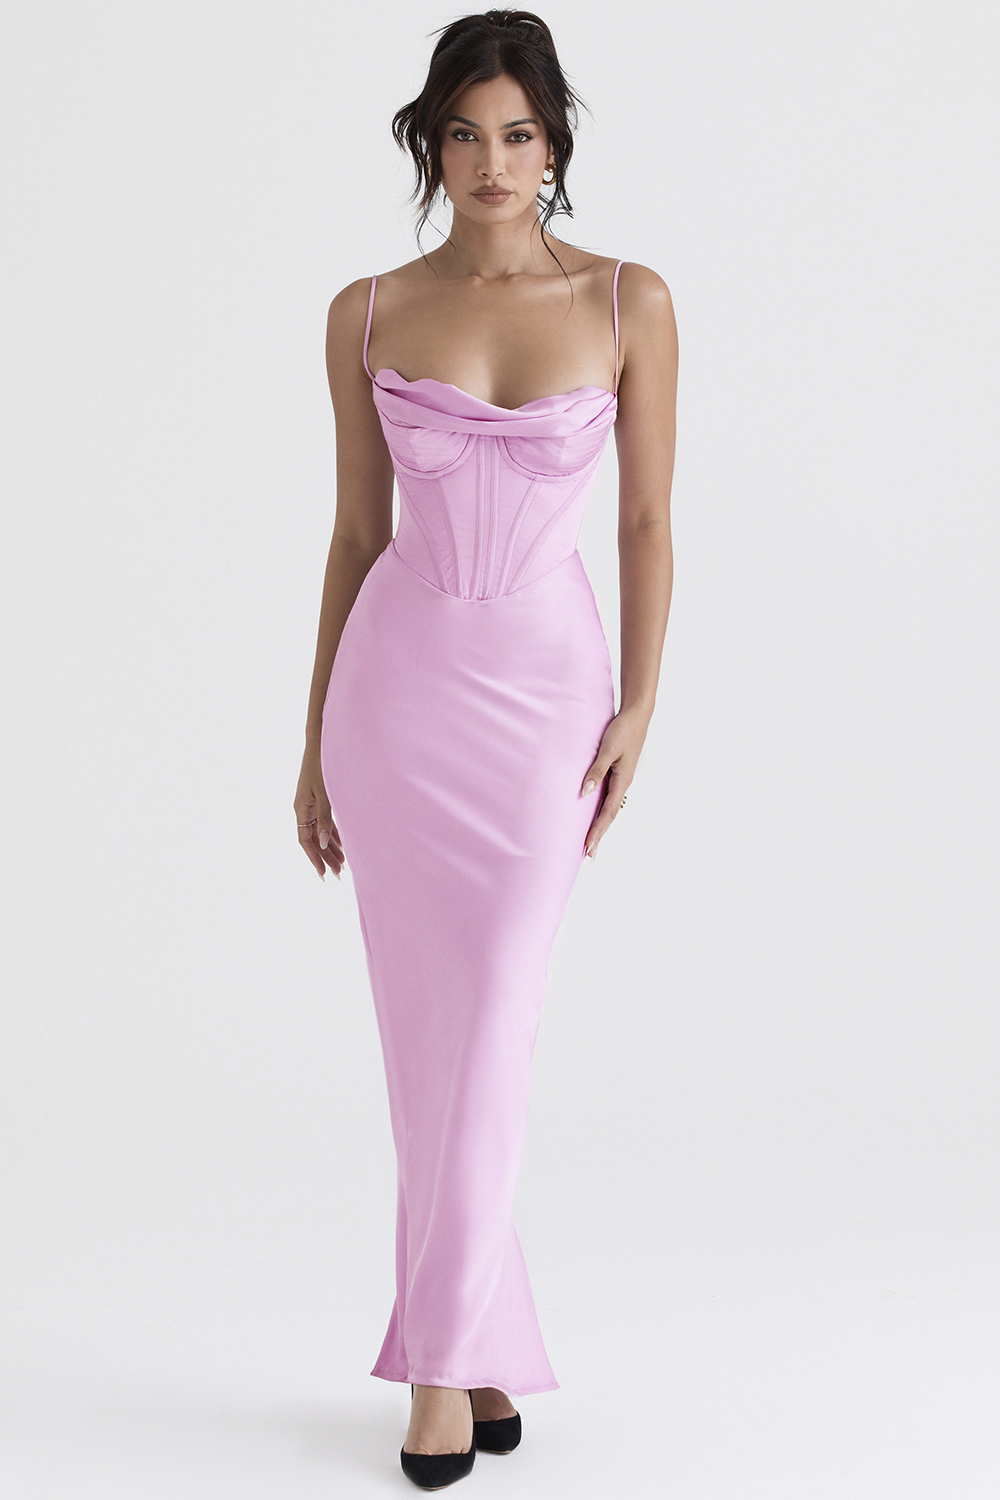 house of cb pink dress